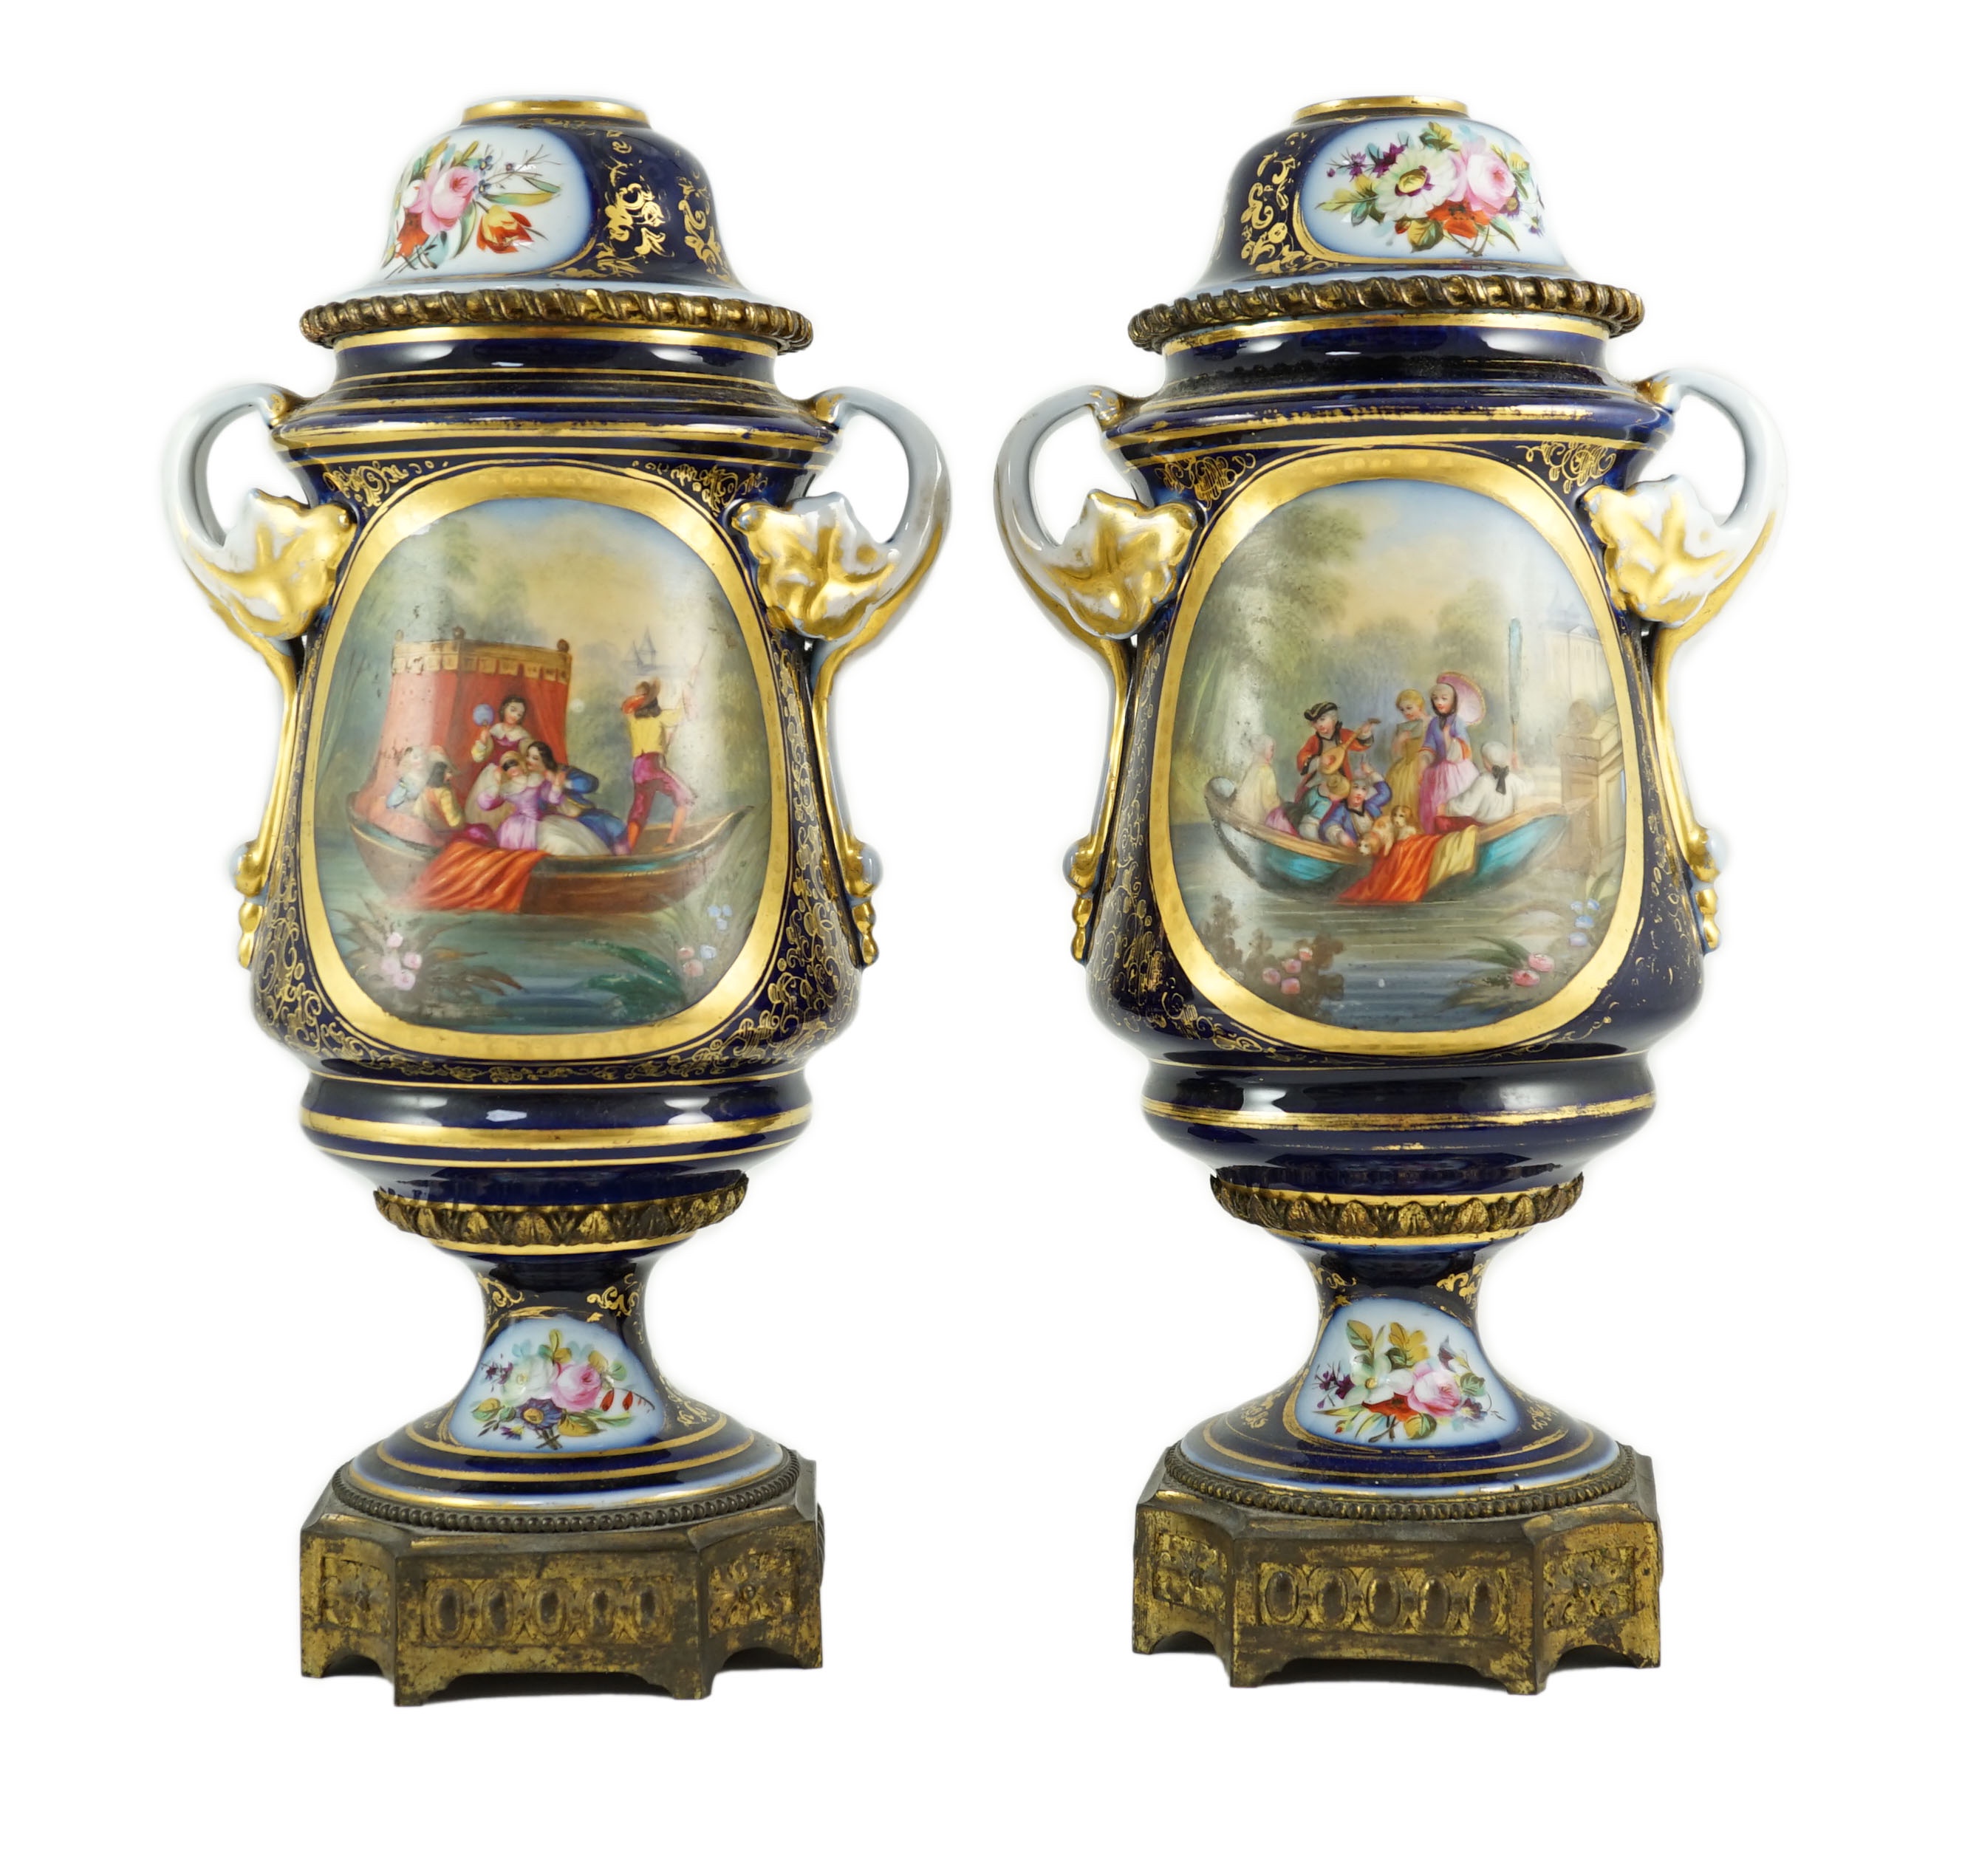 A pair of Sevres style Paris porcelain and ormolu mounted oil lamps, late 19th century, 43 cm high